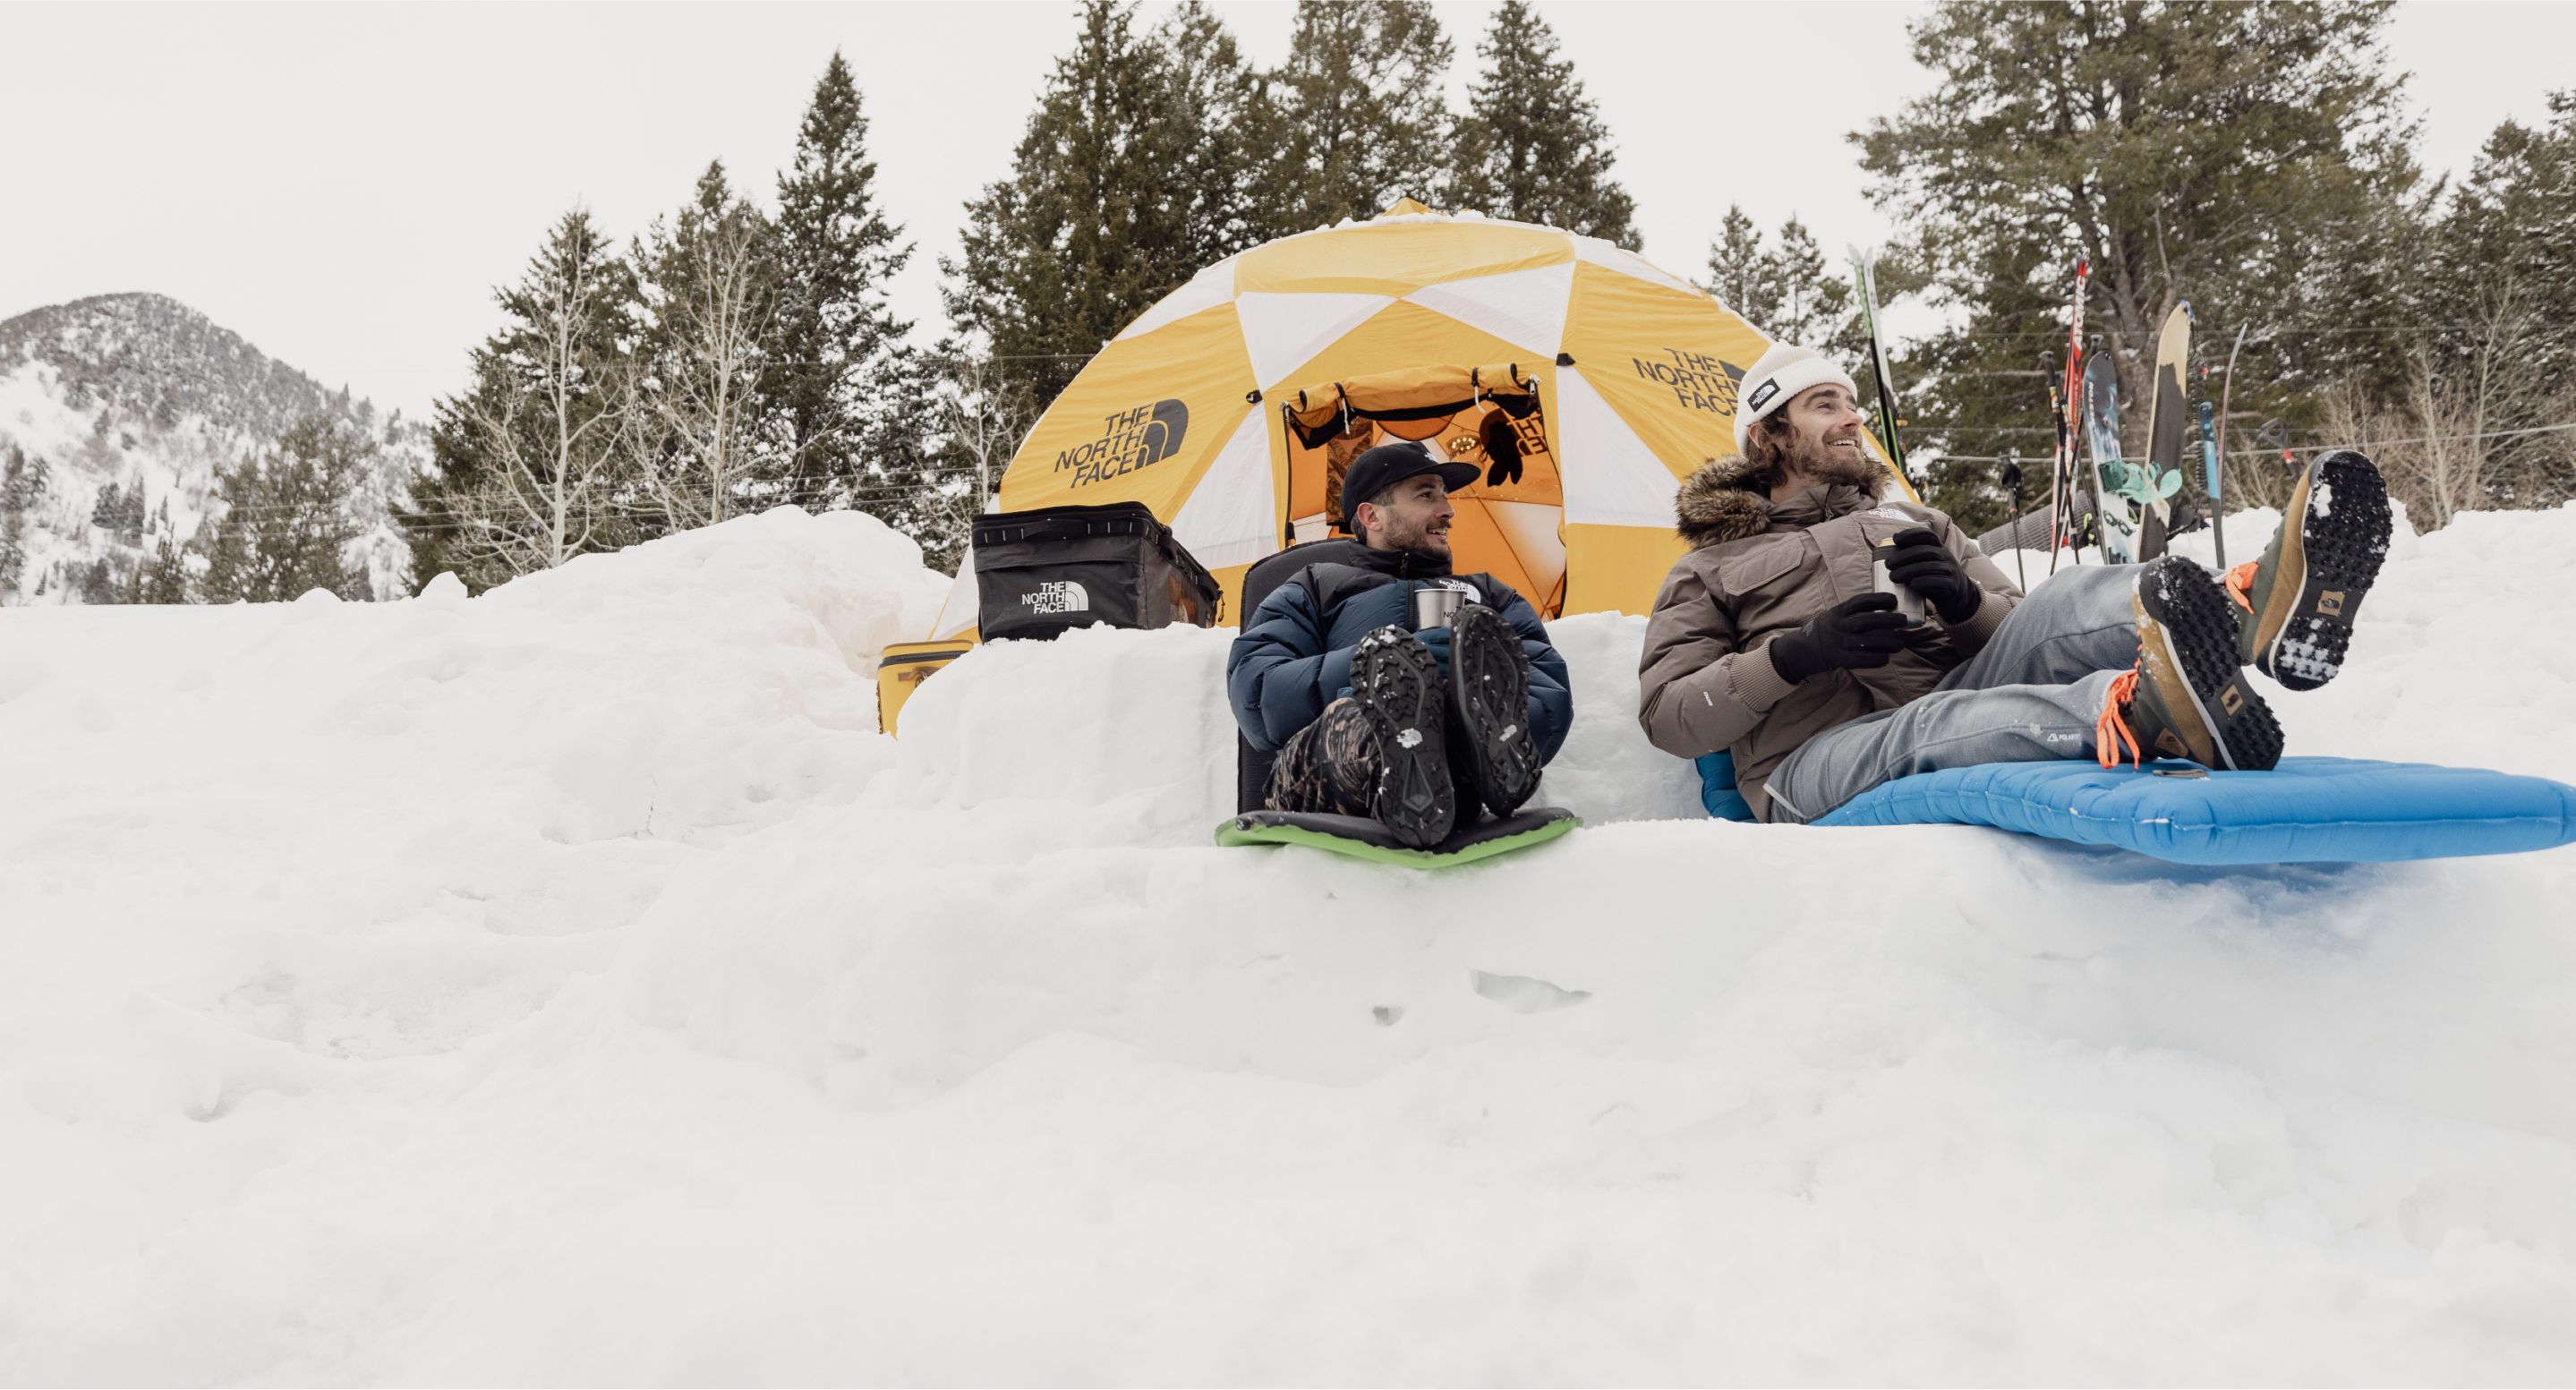 Two friends have set up camp in the snow. They are relaxing on their sleeping pads and holding their coffee outside their yellow tent. Their skis are set up in the distance.  